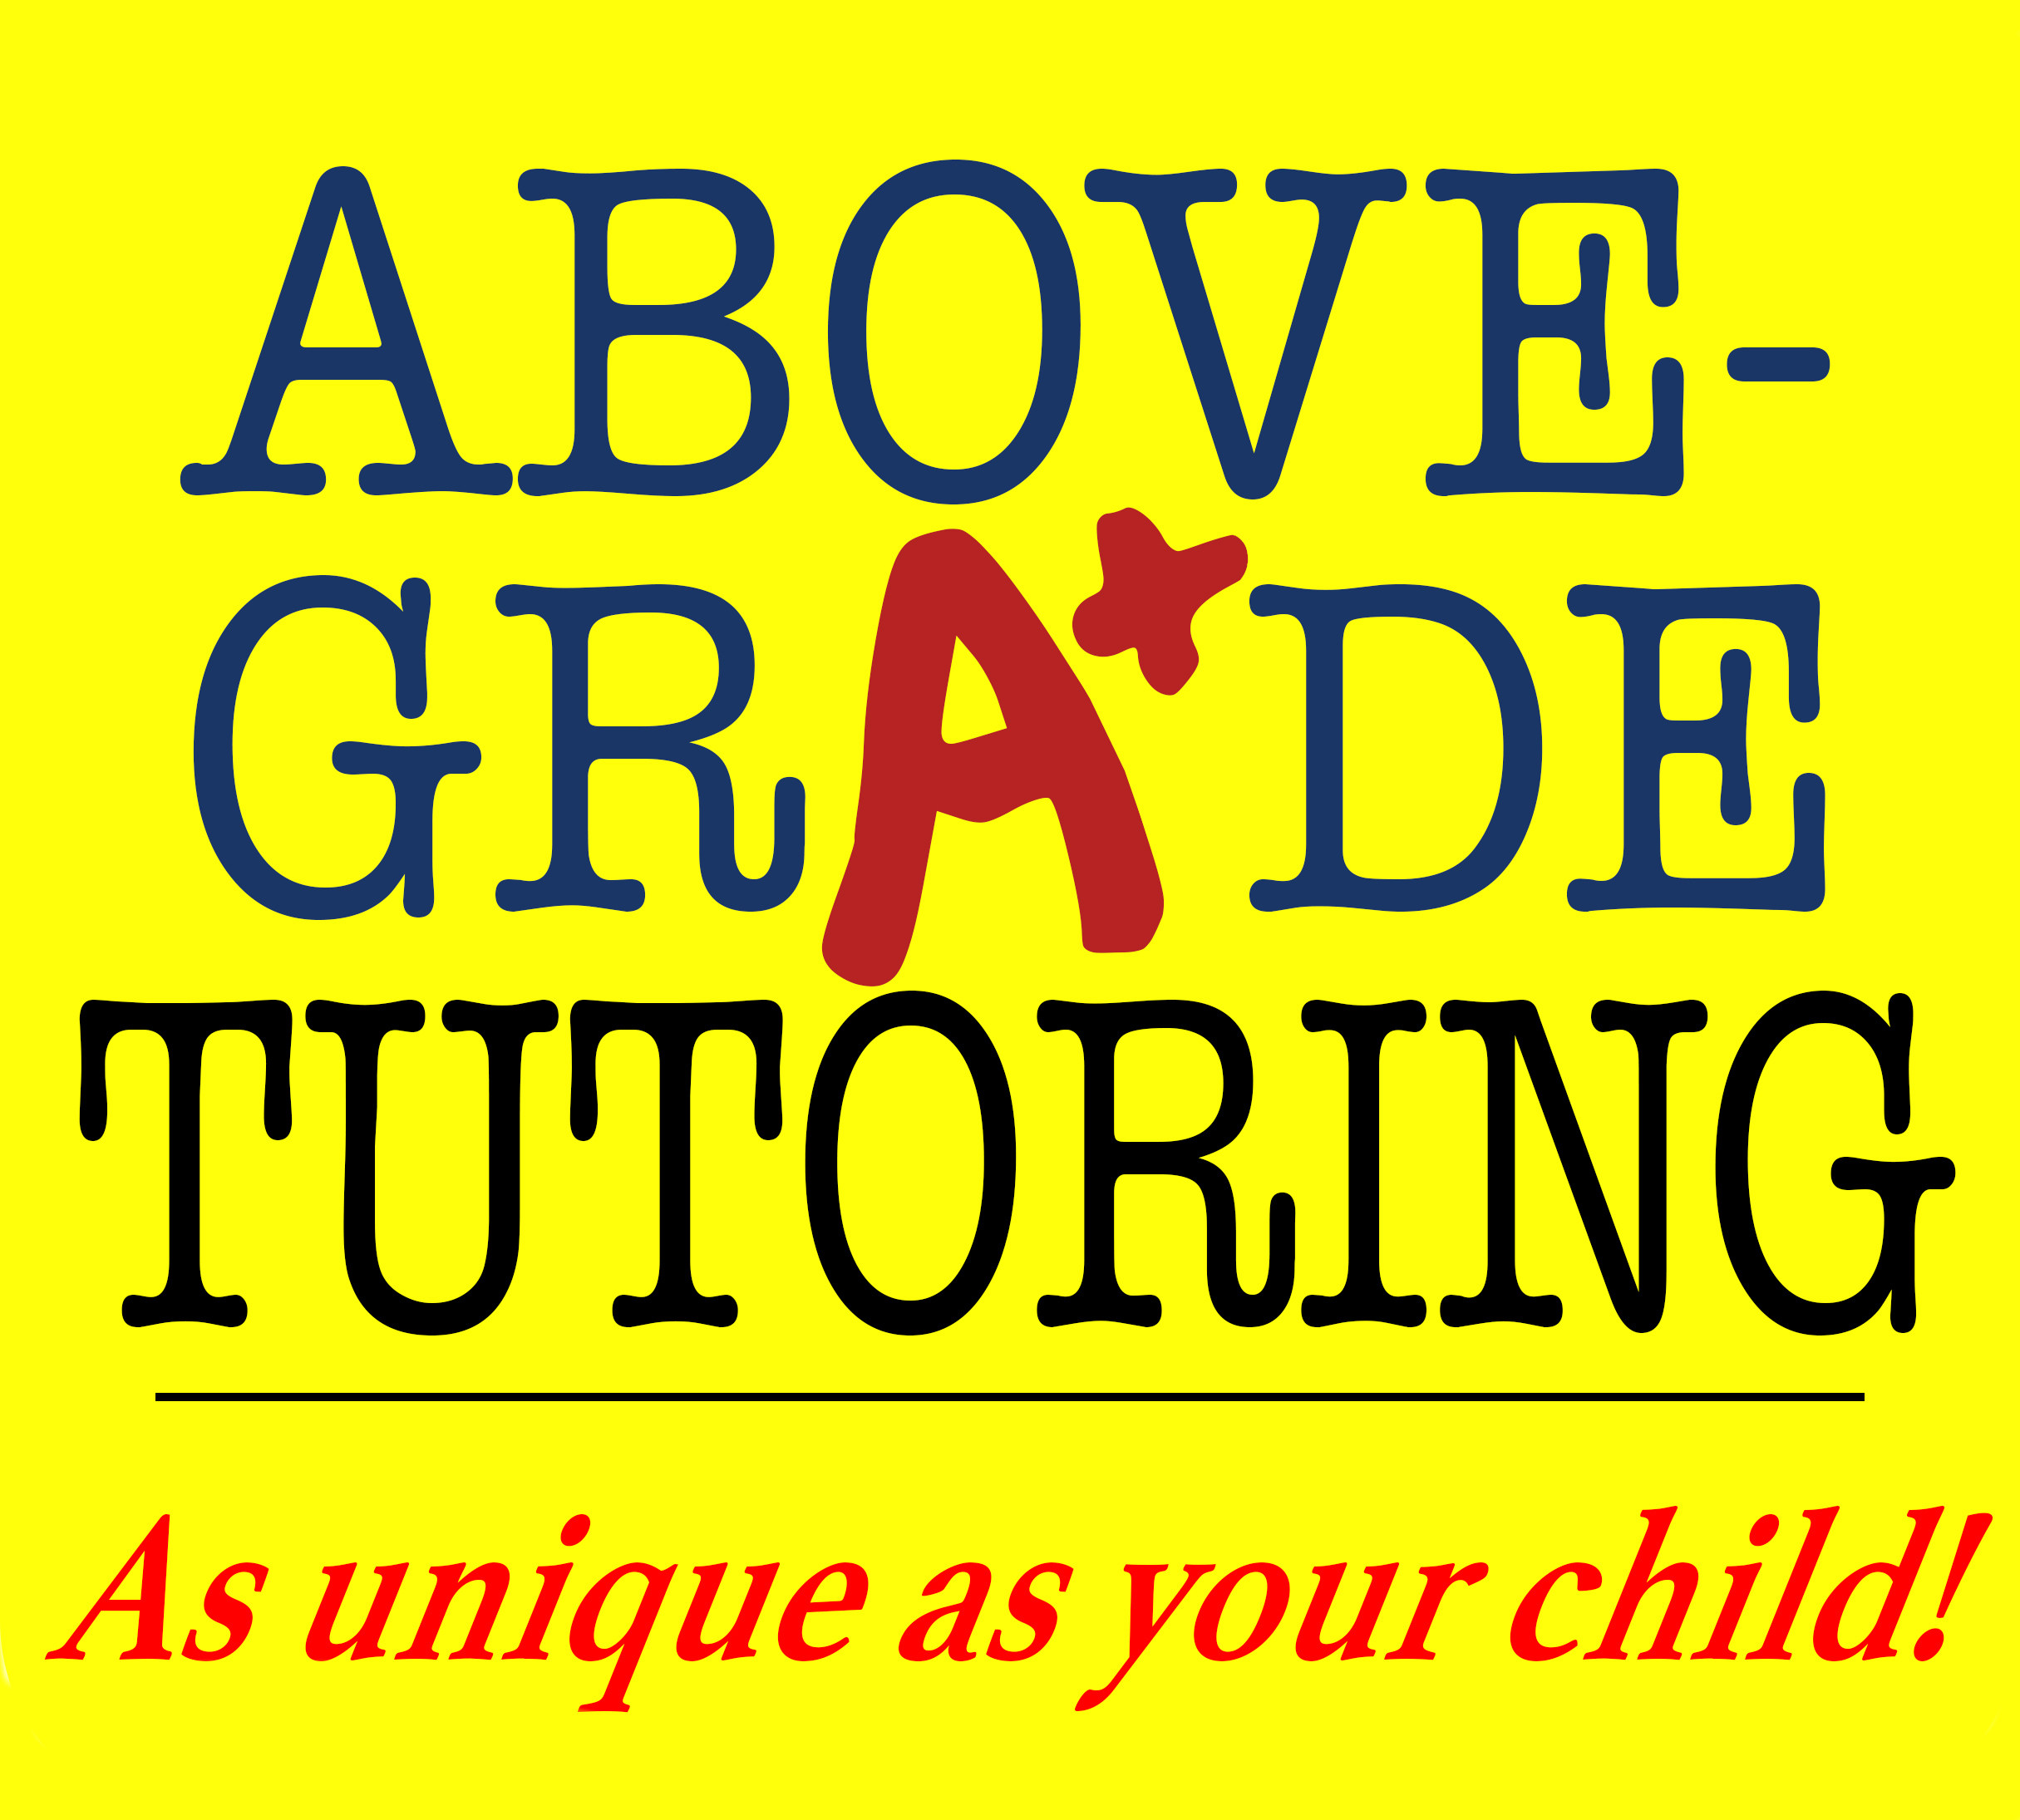 Above-Grade Tutoring. As unique as your child!